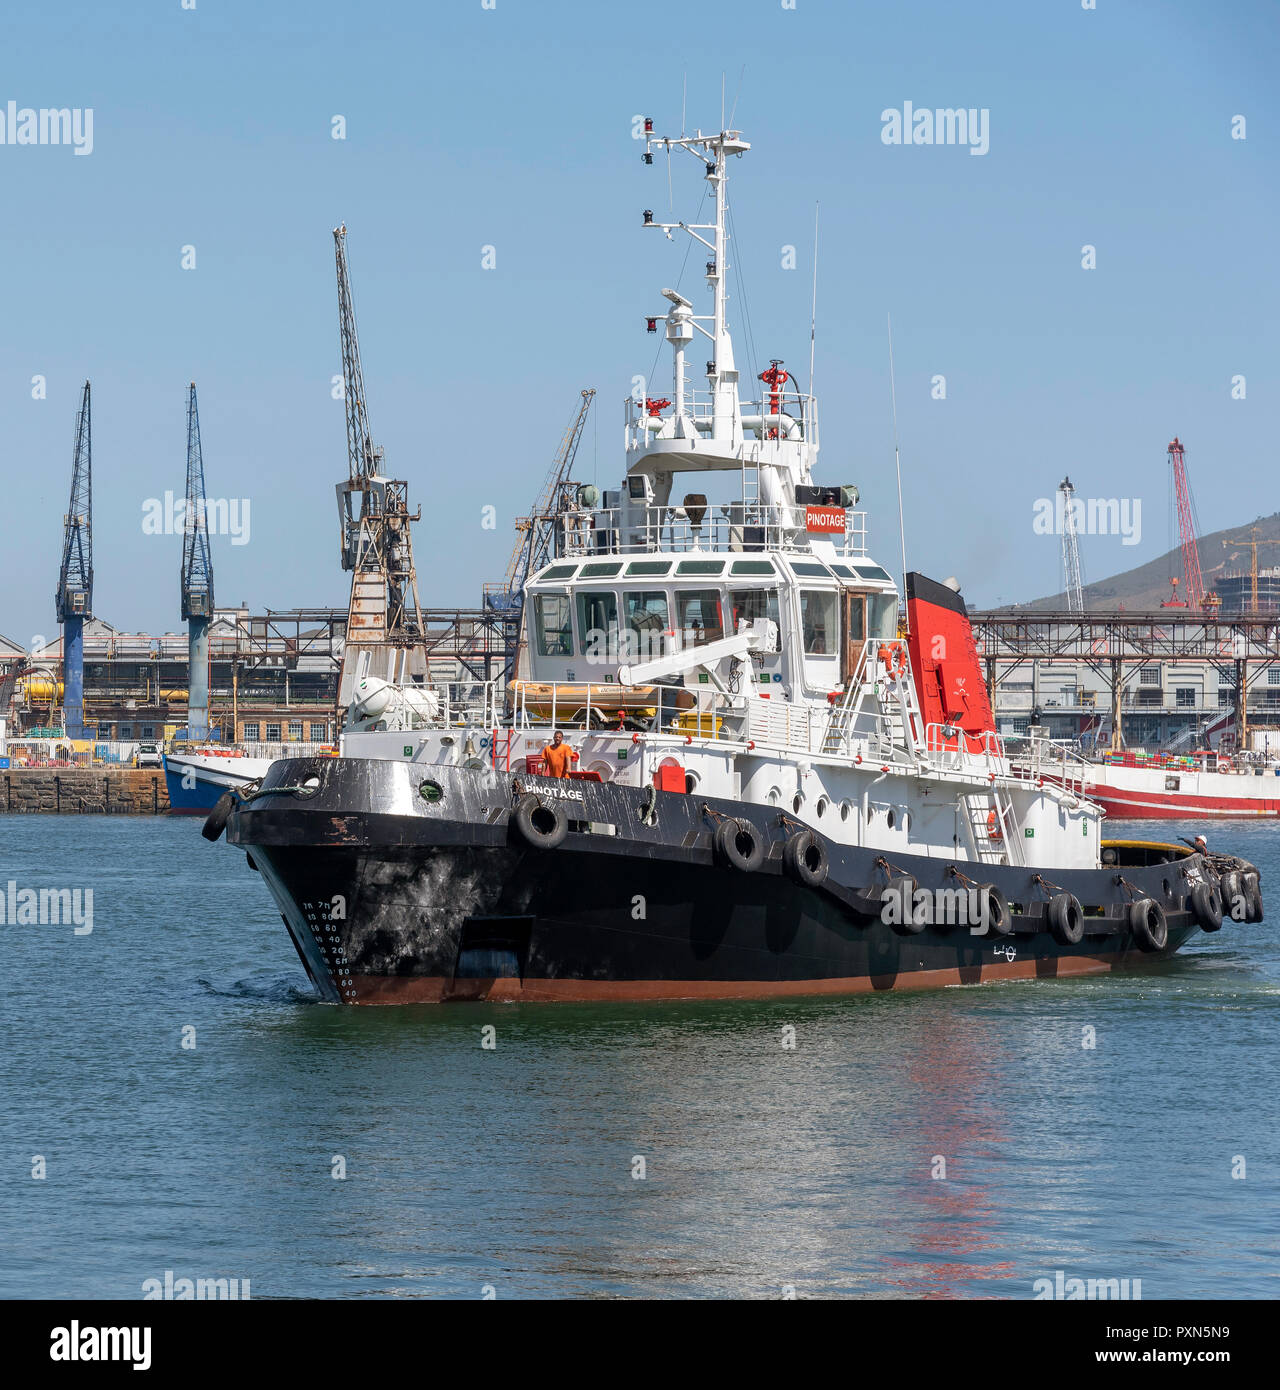 Cape Town South Africa. The ocean going tug Pinotage on the harbour. Stock Photo